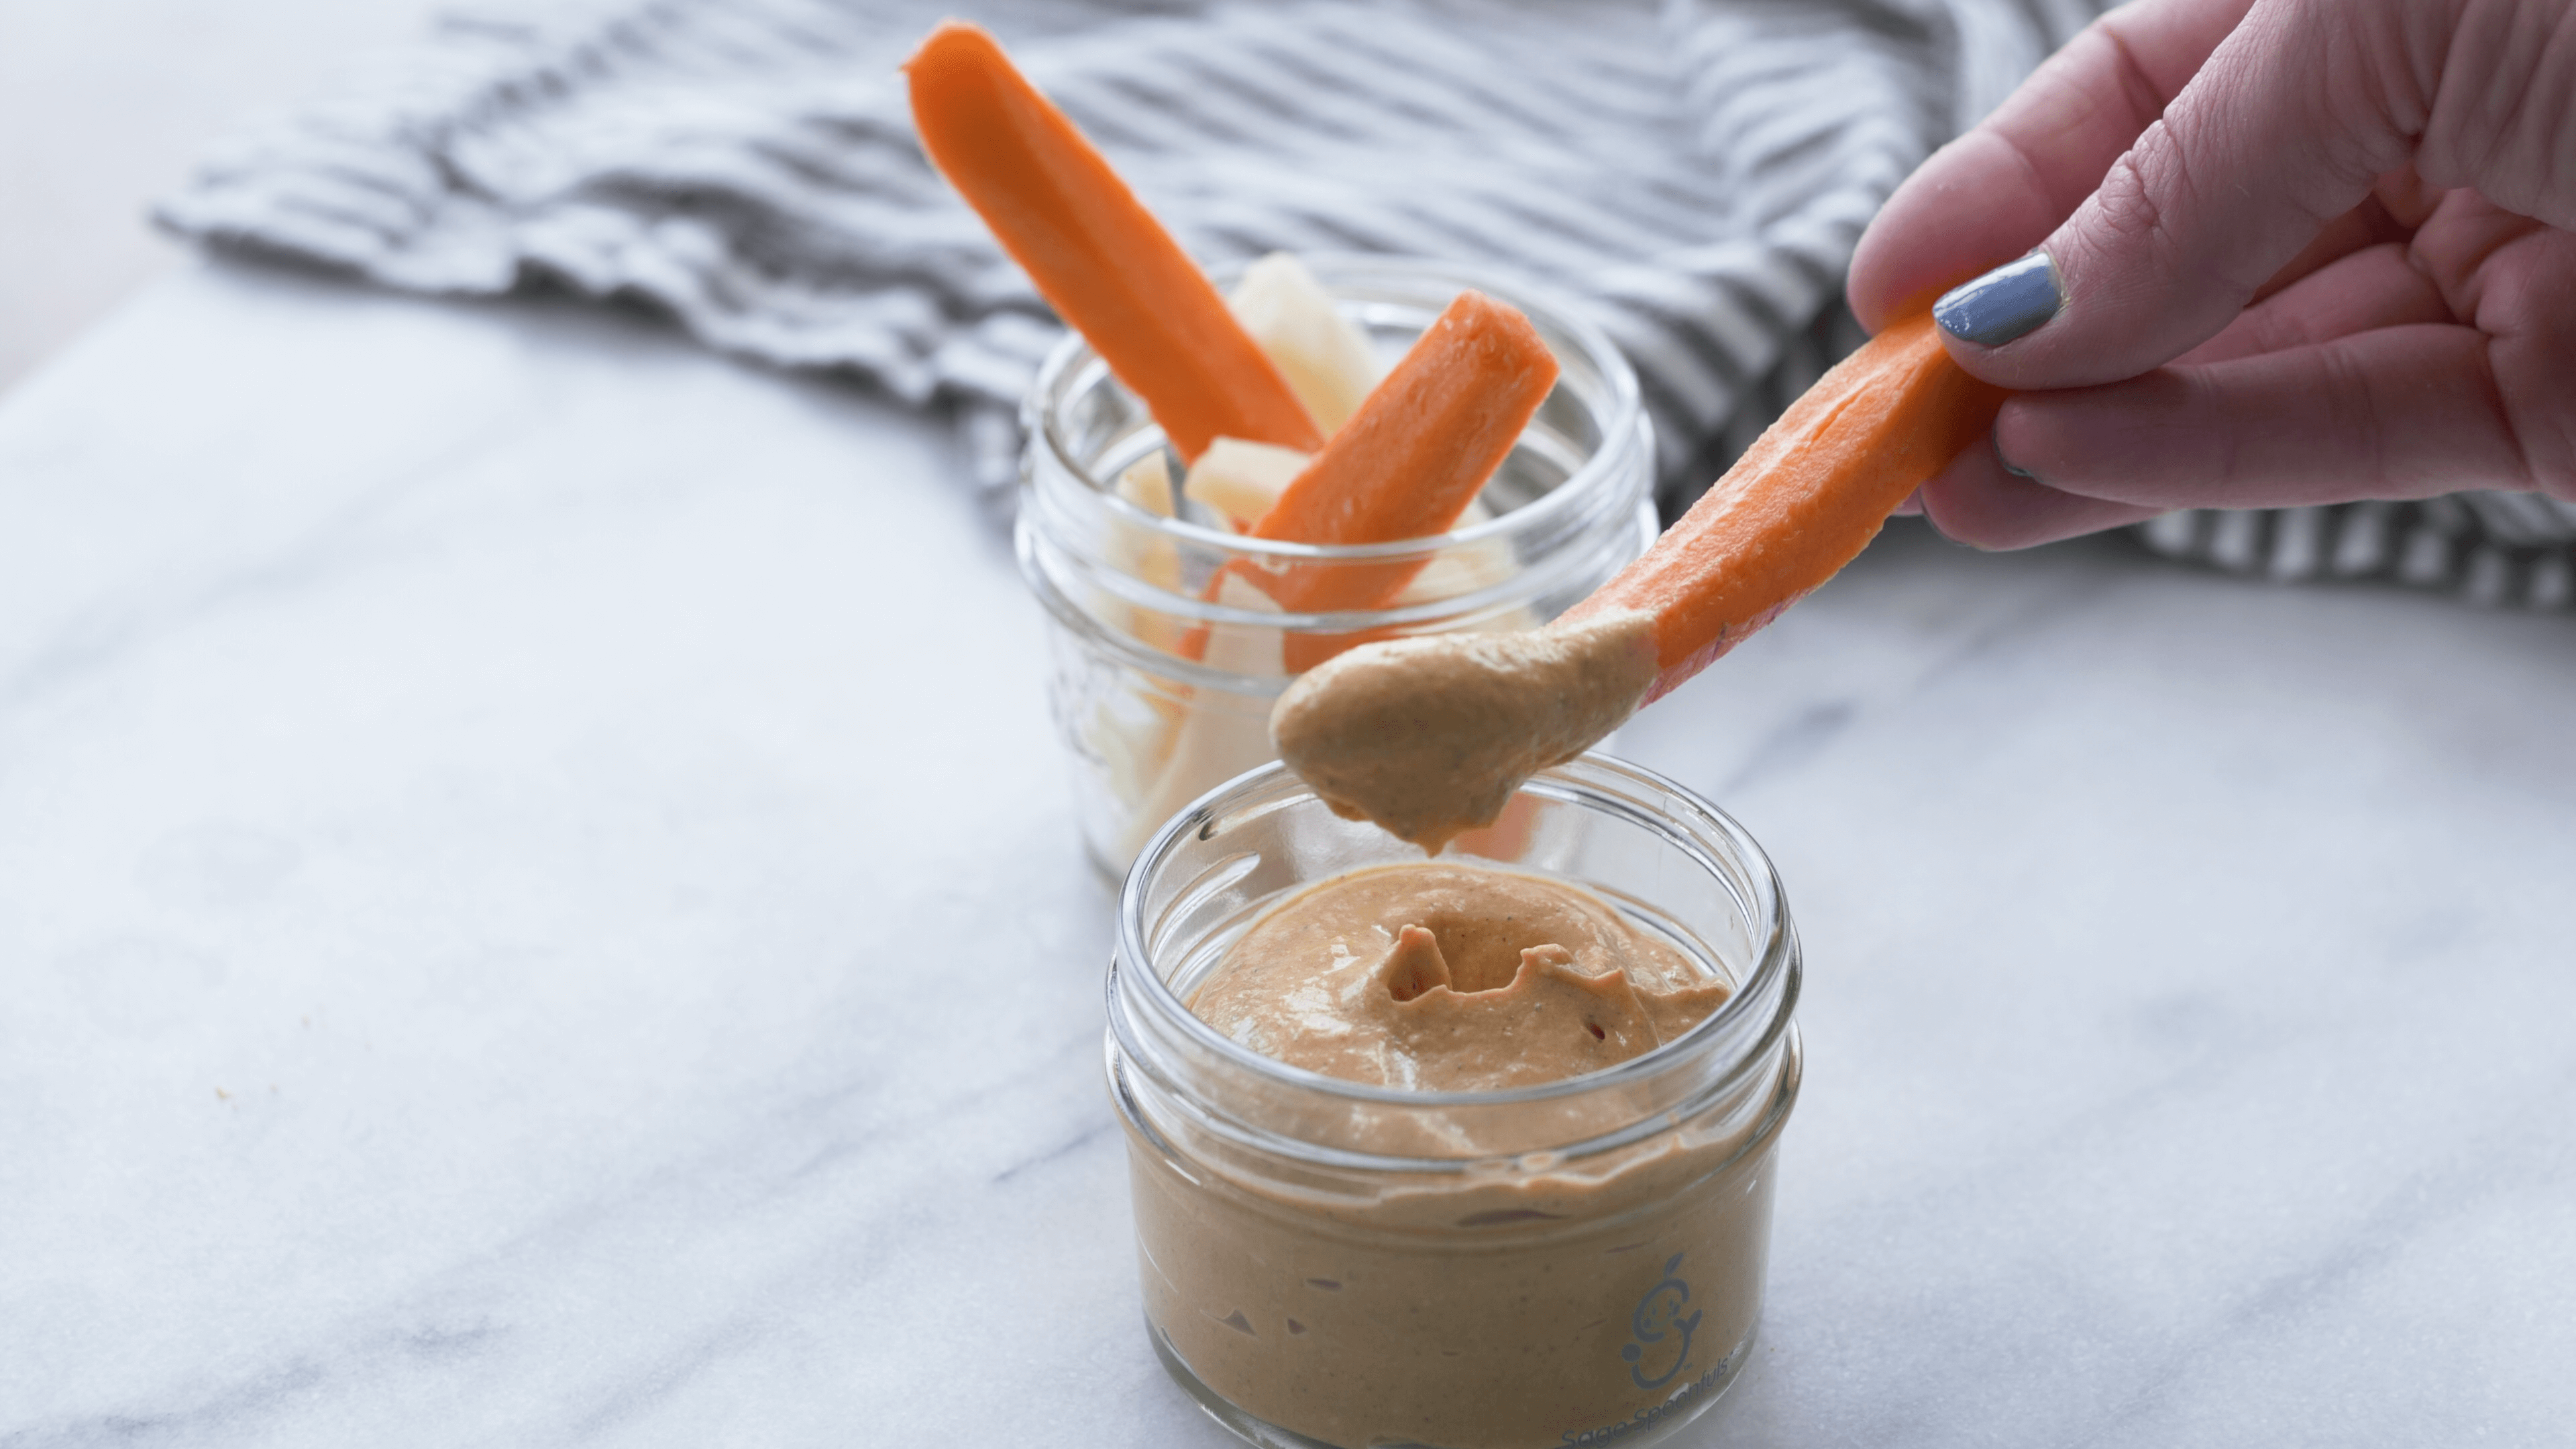 In a bowl, stir together ½ cup whole milk yogurt, ¼ cup canned pumpkin puree, 3 tablespoons peanut butter powder, and a pinch of cinnamon. With the latest research suggesting early peanut introduction, we've rounded up 8 ways on how to feed peanut butter to baby.